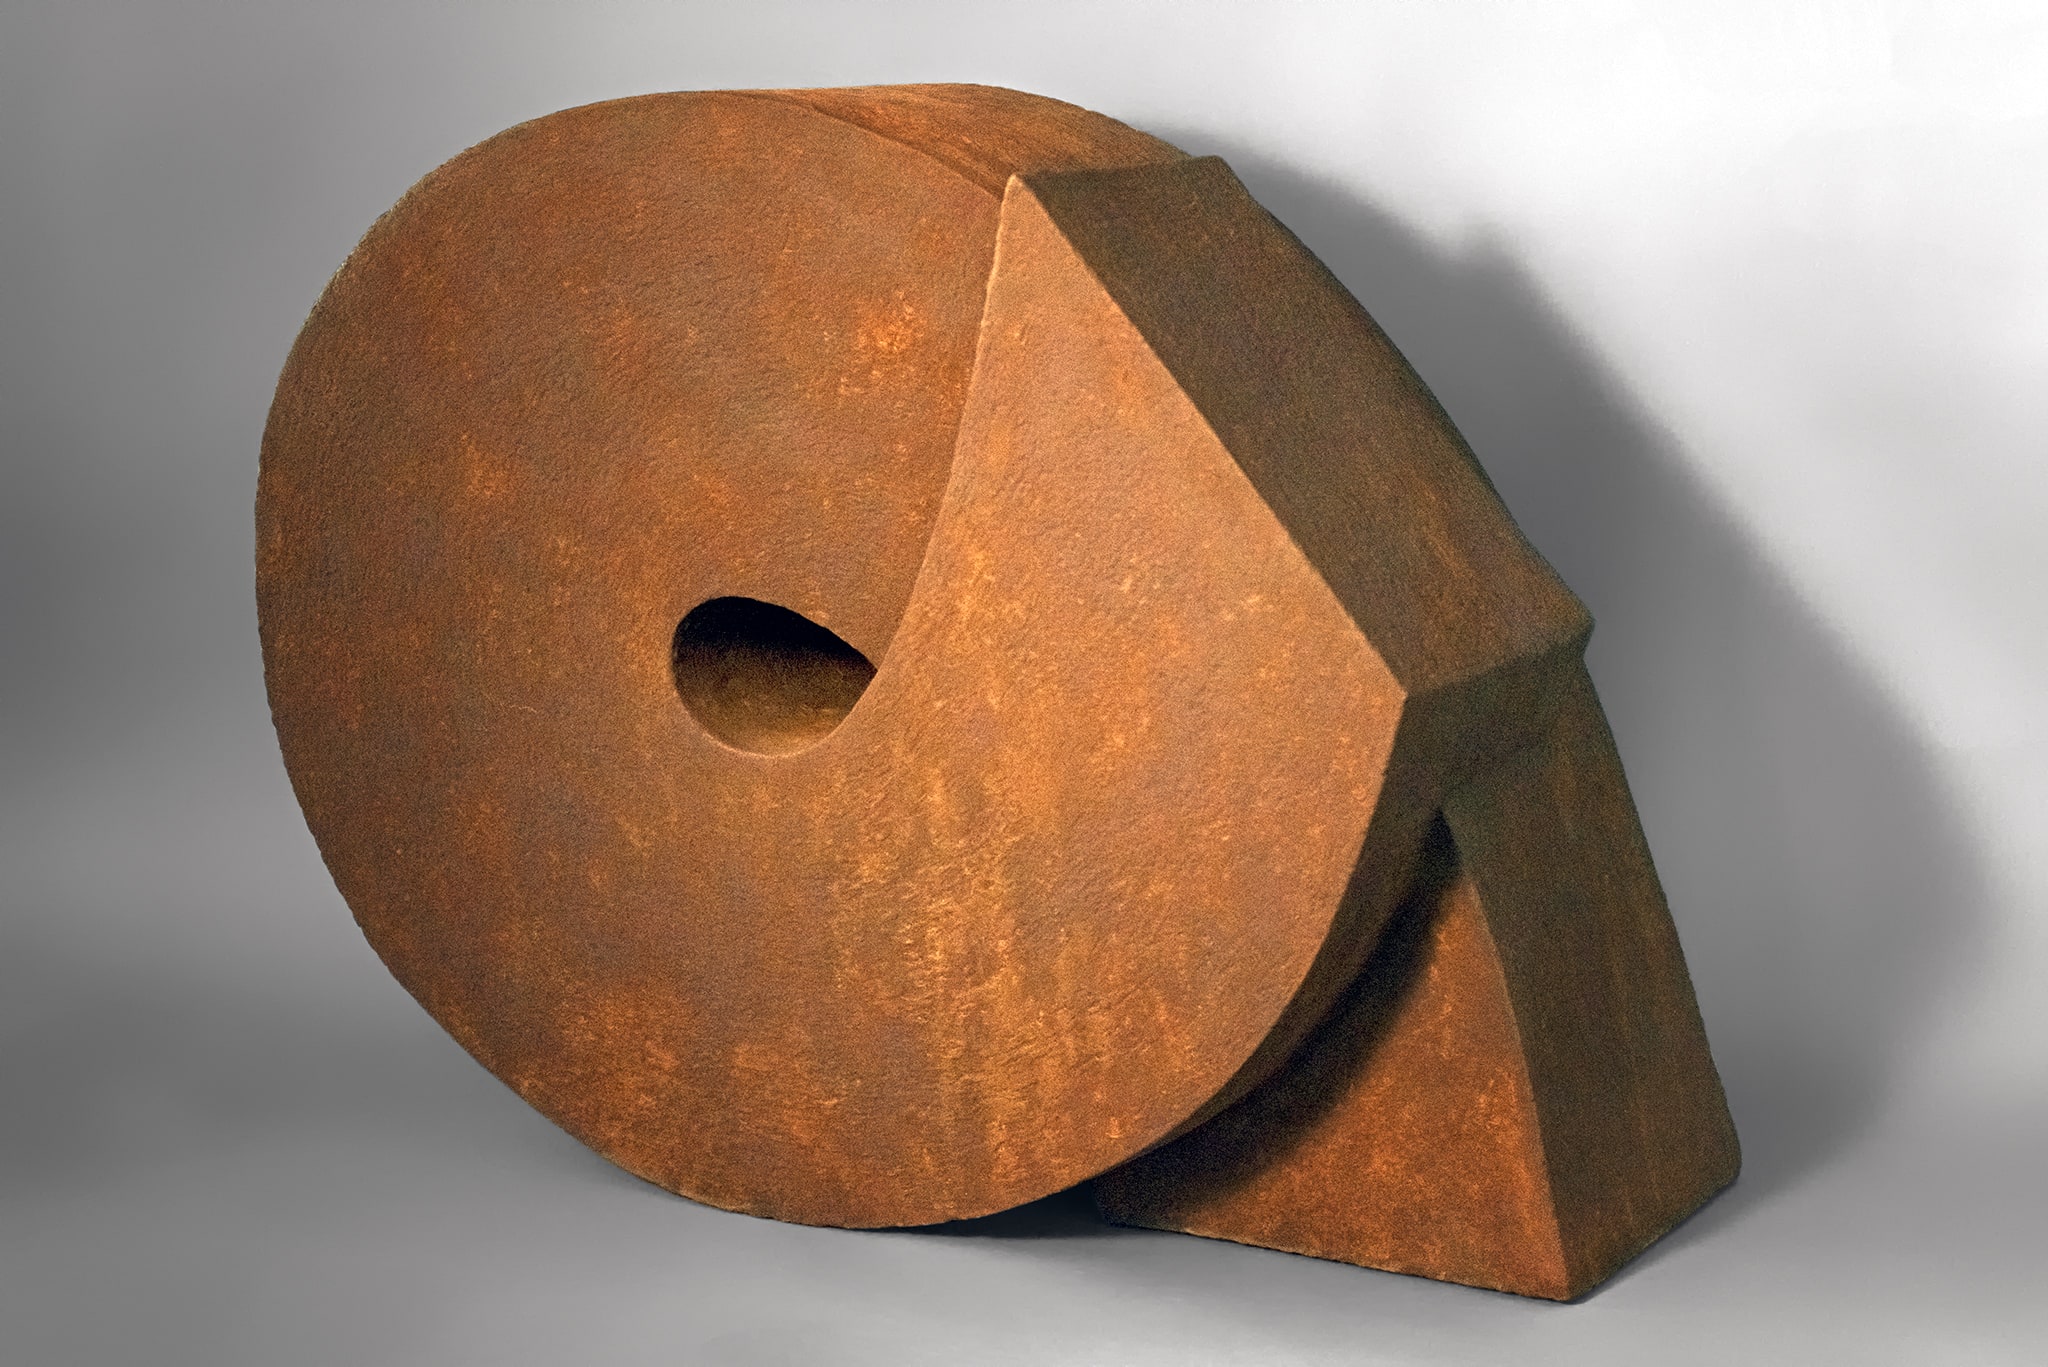 Intersection 2.0 17" x 20" x 12", clay with iron oxide finish